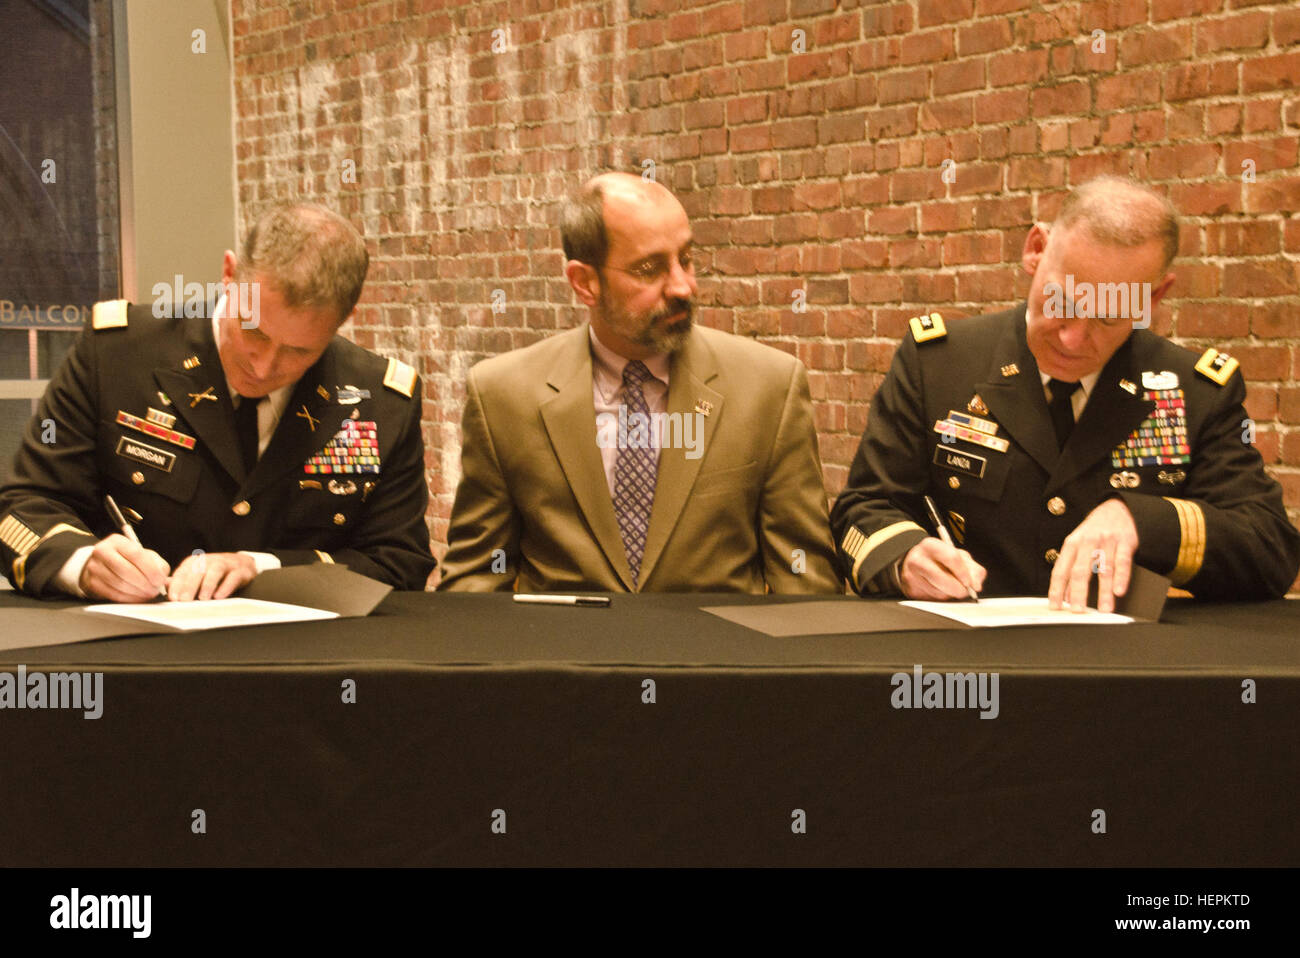 Col. Daniel S. Morgan, commander, Joint Base Lewis-McChord, left, Mark A. Pagano, chancellor, University of Washington-Tacoma, center, and Lt. Gen. Stephen R. Lanza, commanding general, I Corps, JBLM, right, come together to sign partnership resolutions at the UW-T, Oct. 29, 2015.  Both JBLM and I Corps signed partnership resolutions with the UW-T agreeing to become a model university and military institutional partnership. (U.S. Army photo by Sgt. Jasmine Higgins, 28th Public Affairs Detachment) Sign 151030-A-HS859-059 Stock Photo